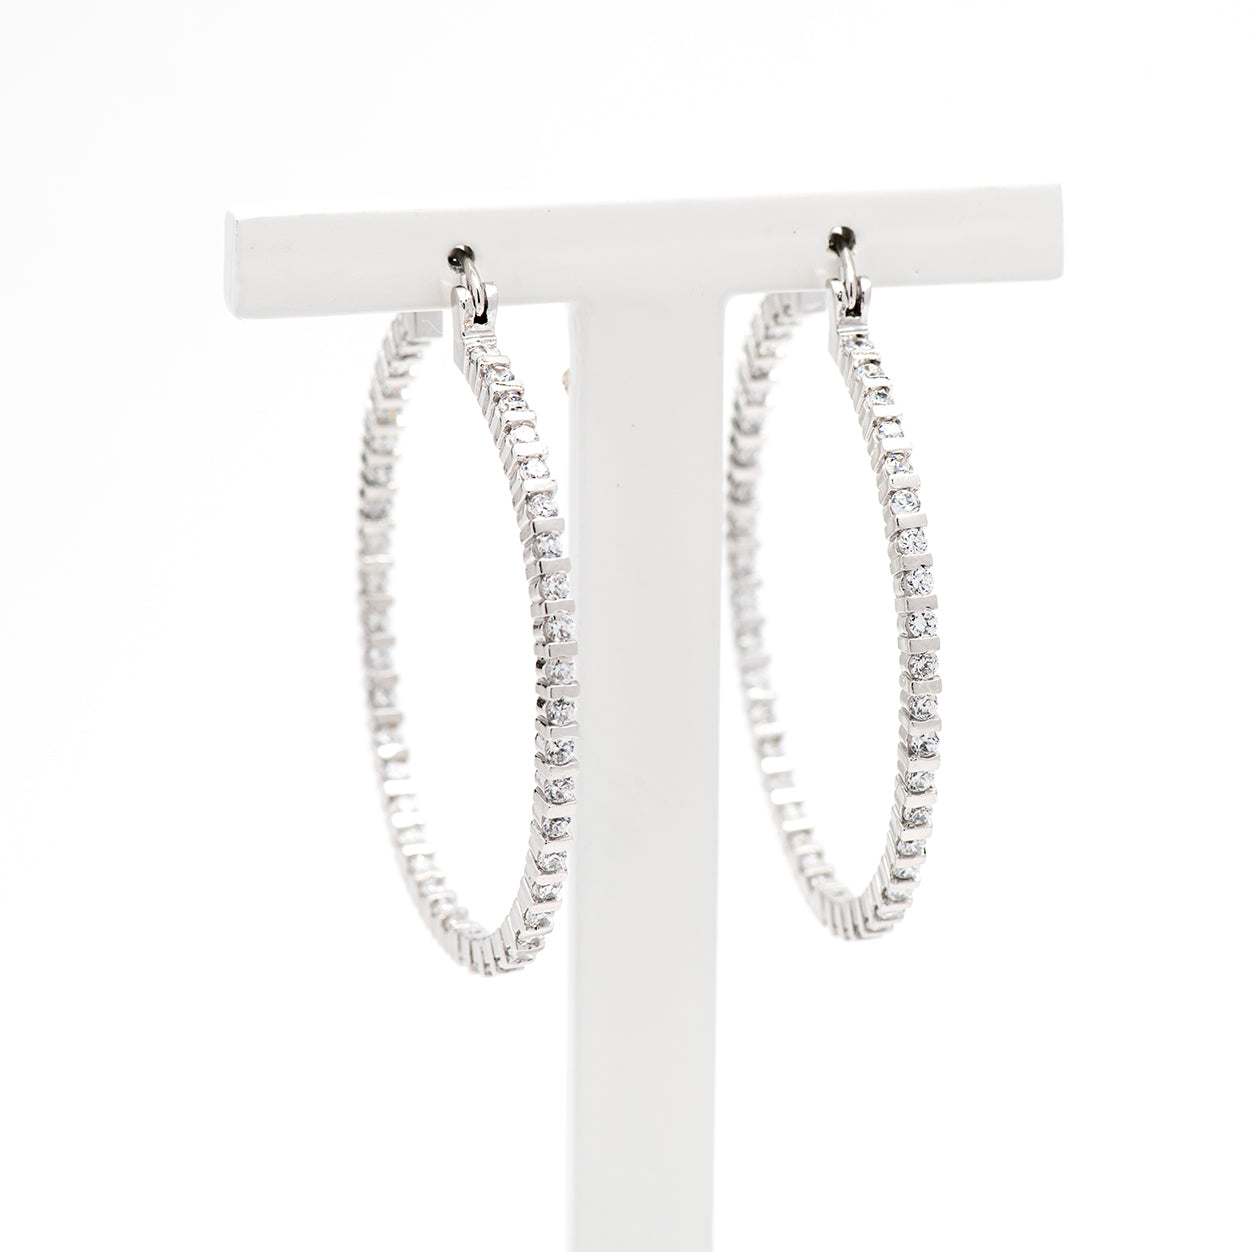 DK-925-101 sterling silver hoops with CZ